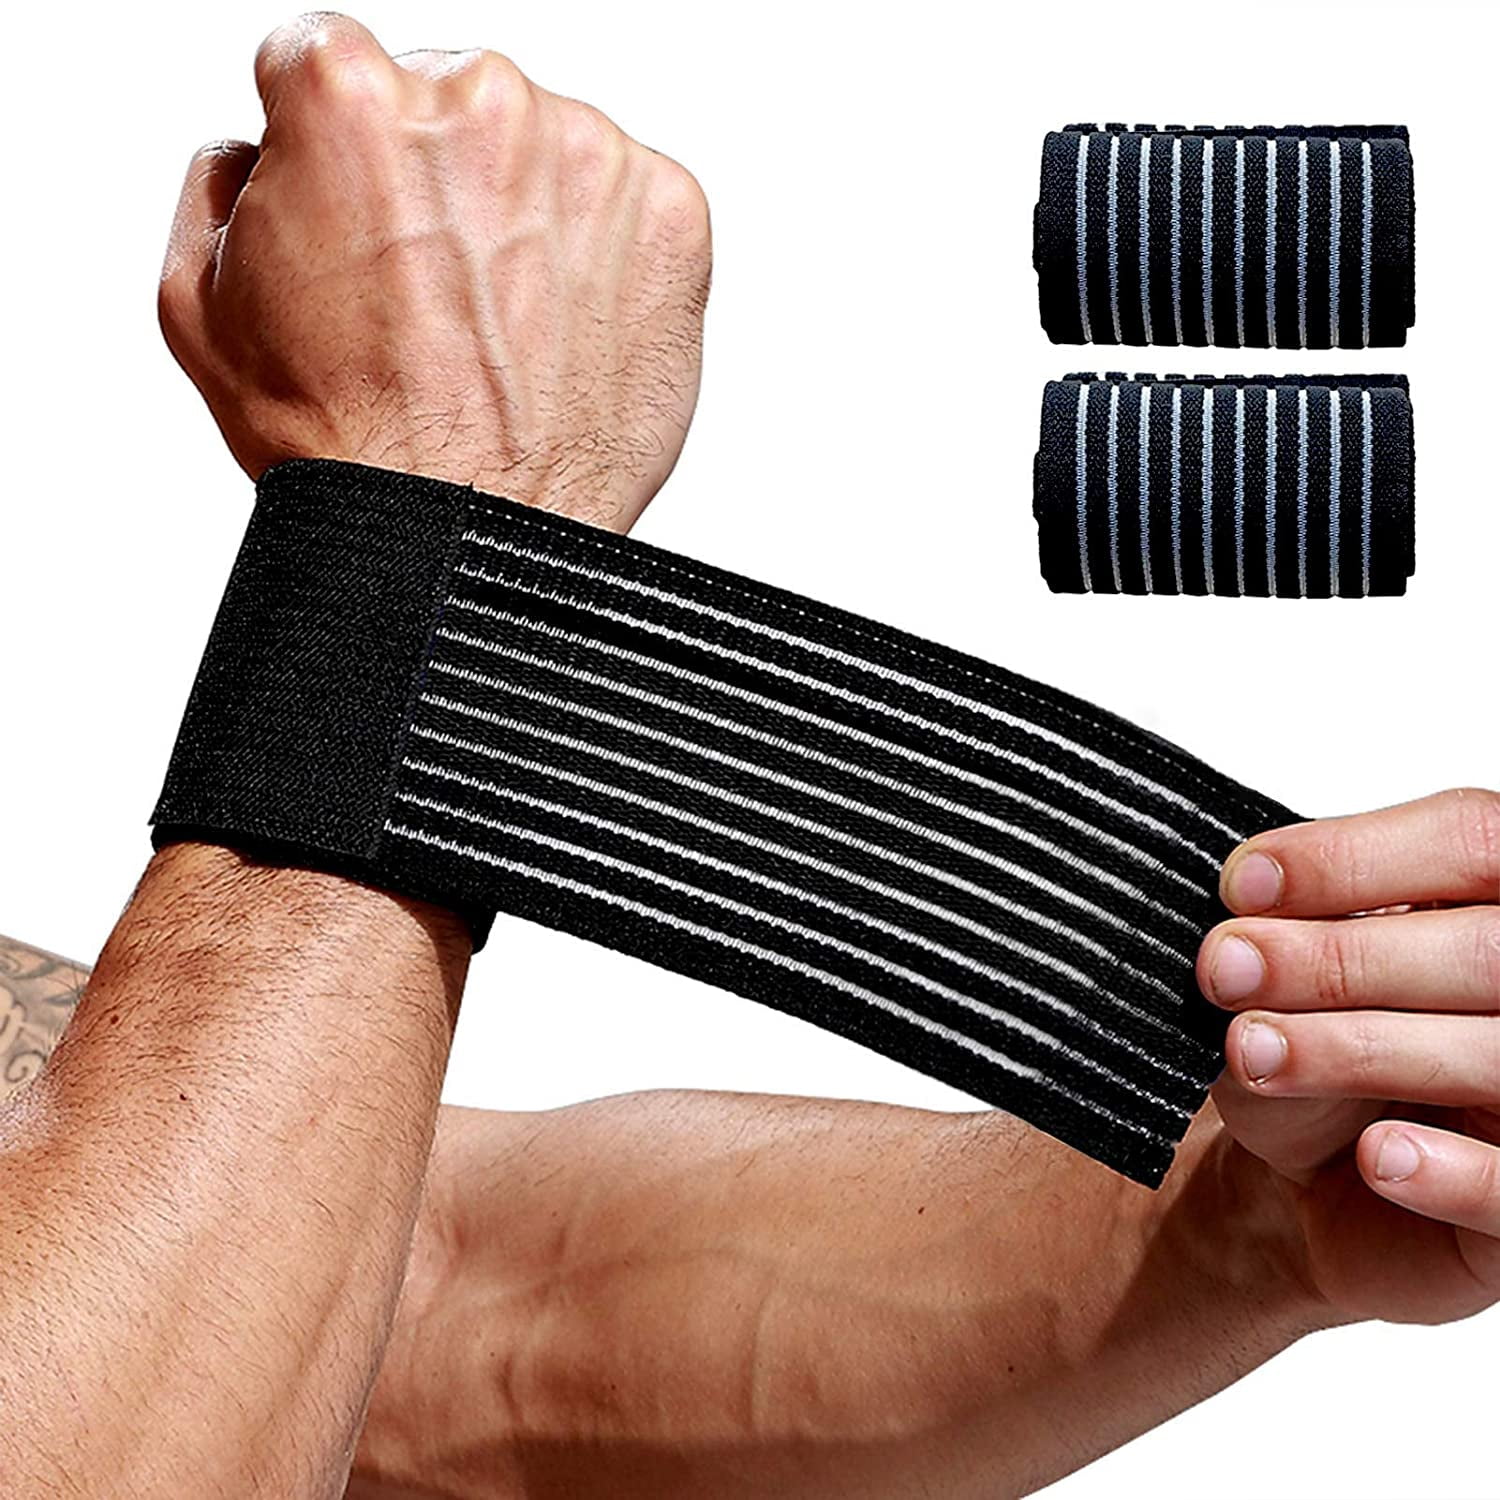 Wrist Support Brace Carpal Tunnel Exercise Gloves Wrap Compression Glove 2 Pair